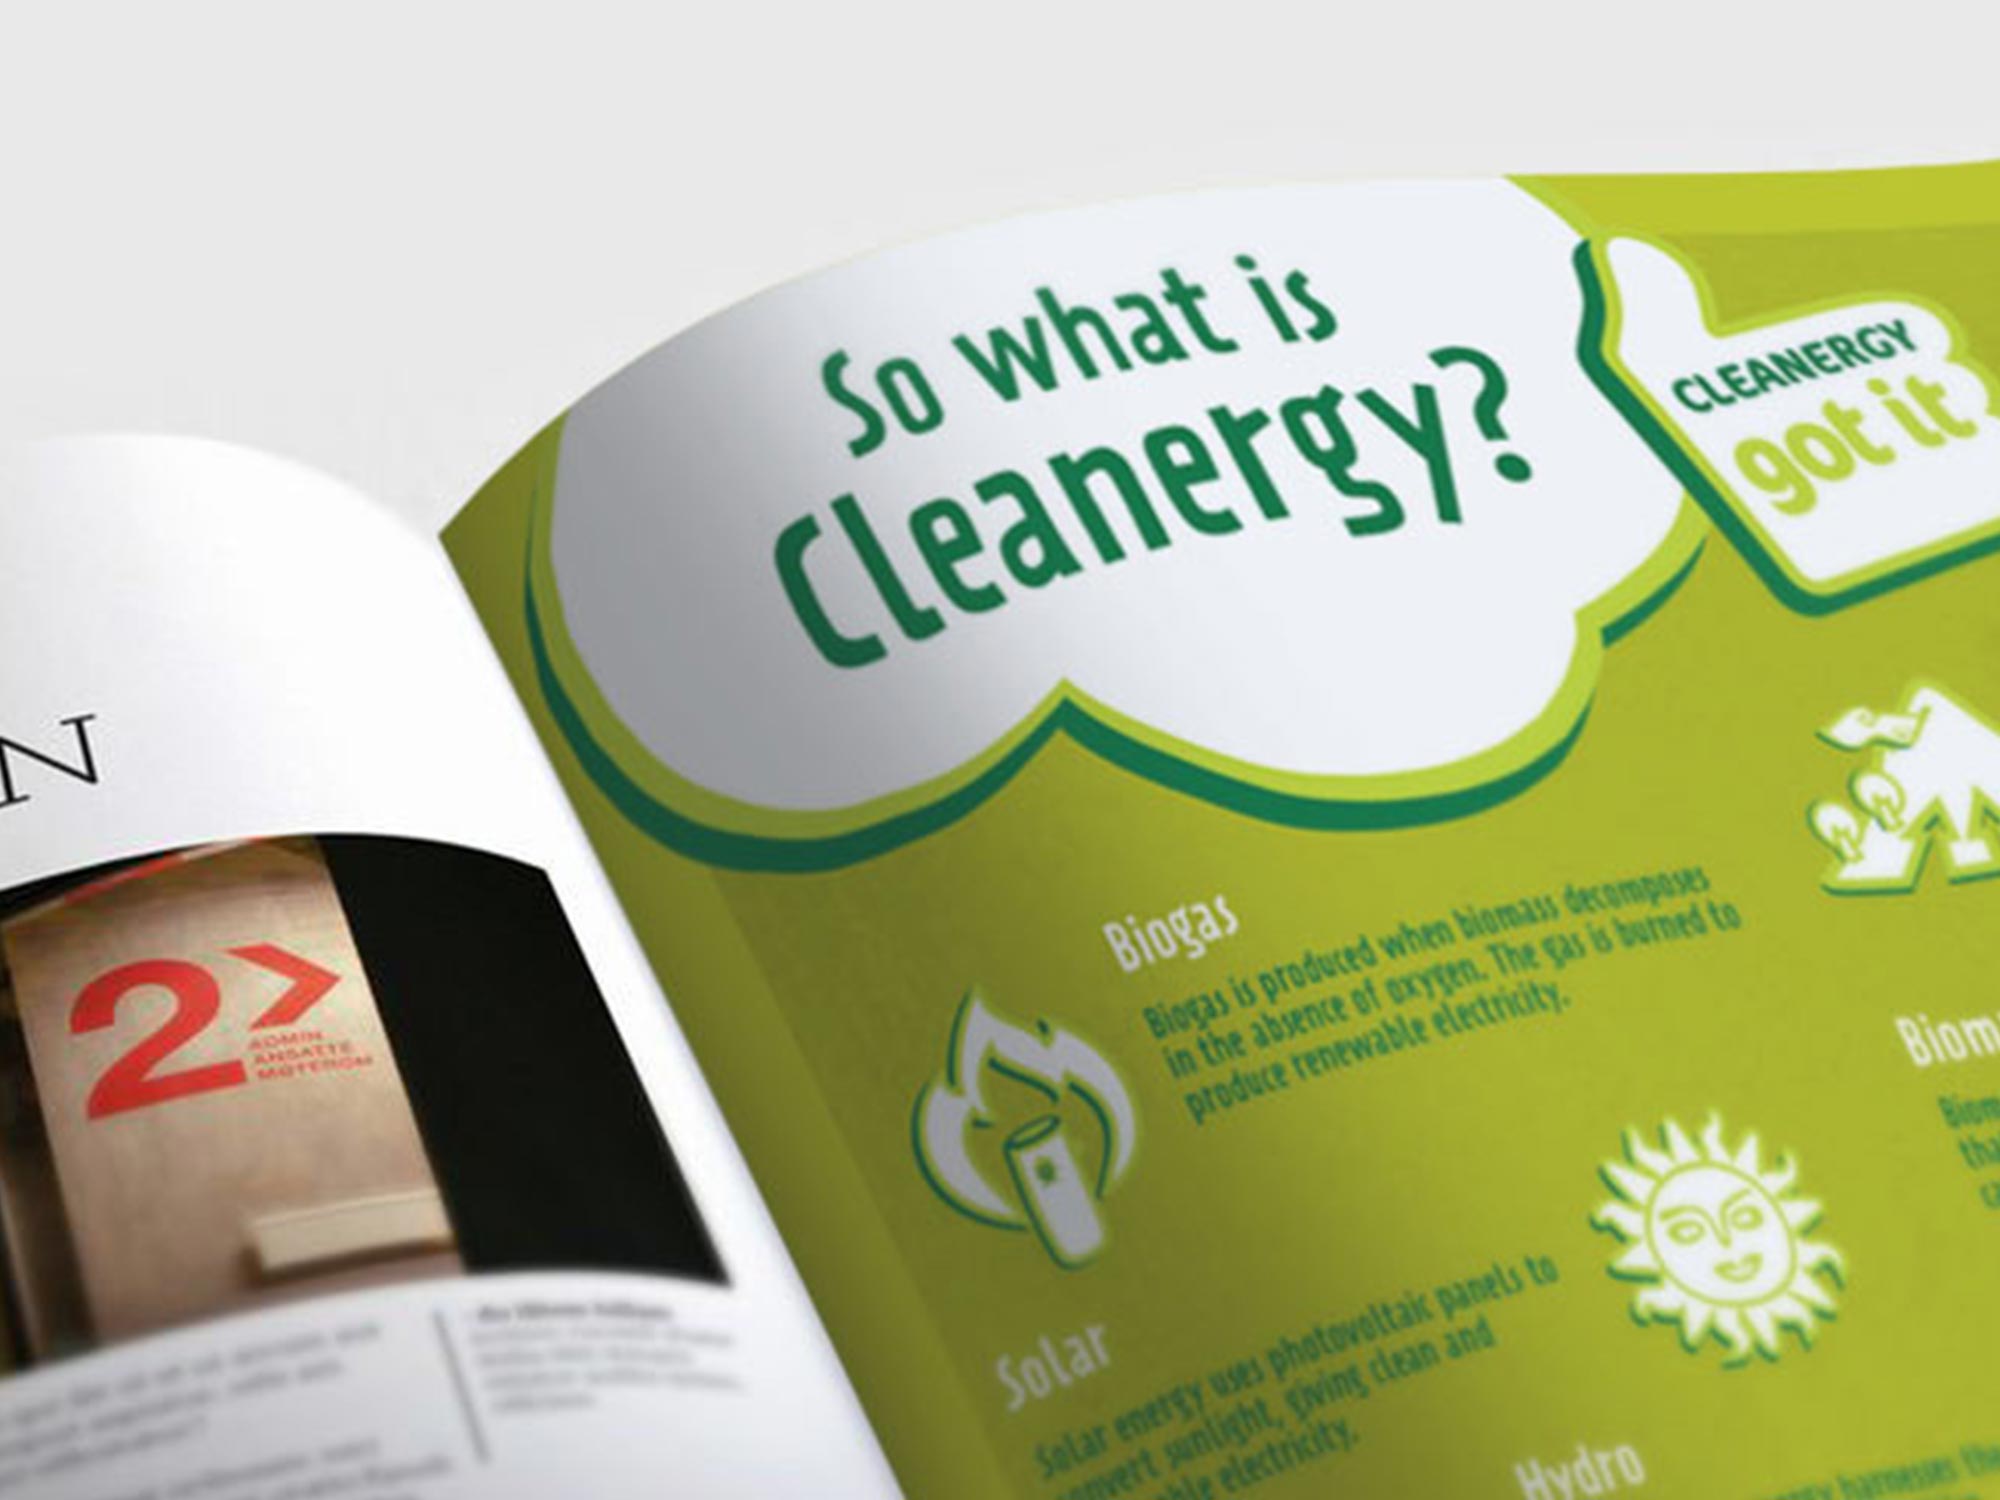 Brand Consultancy in Energy Industry. Brochure for Cleanergy.